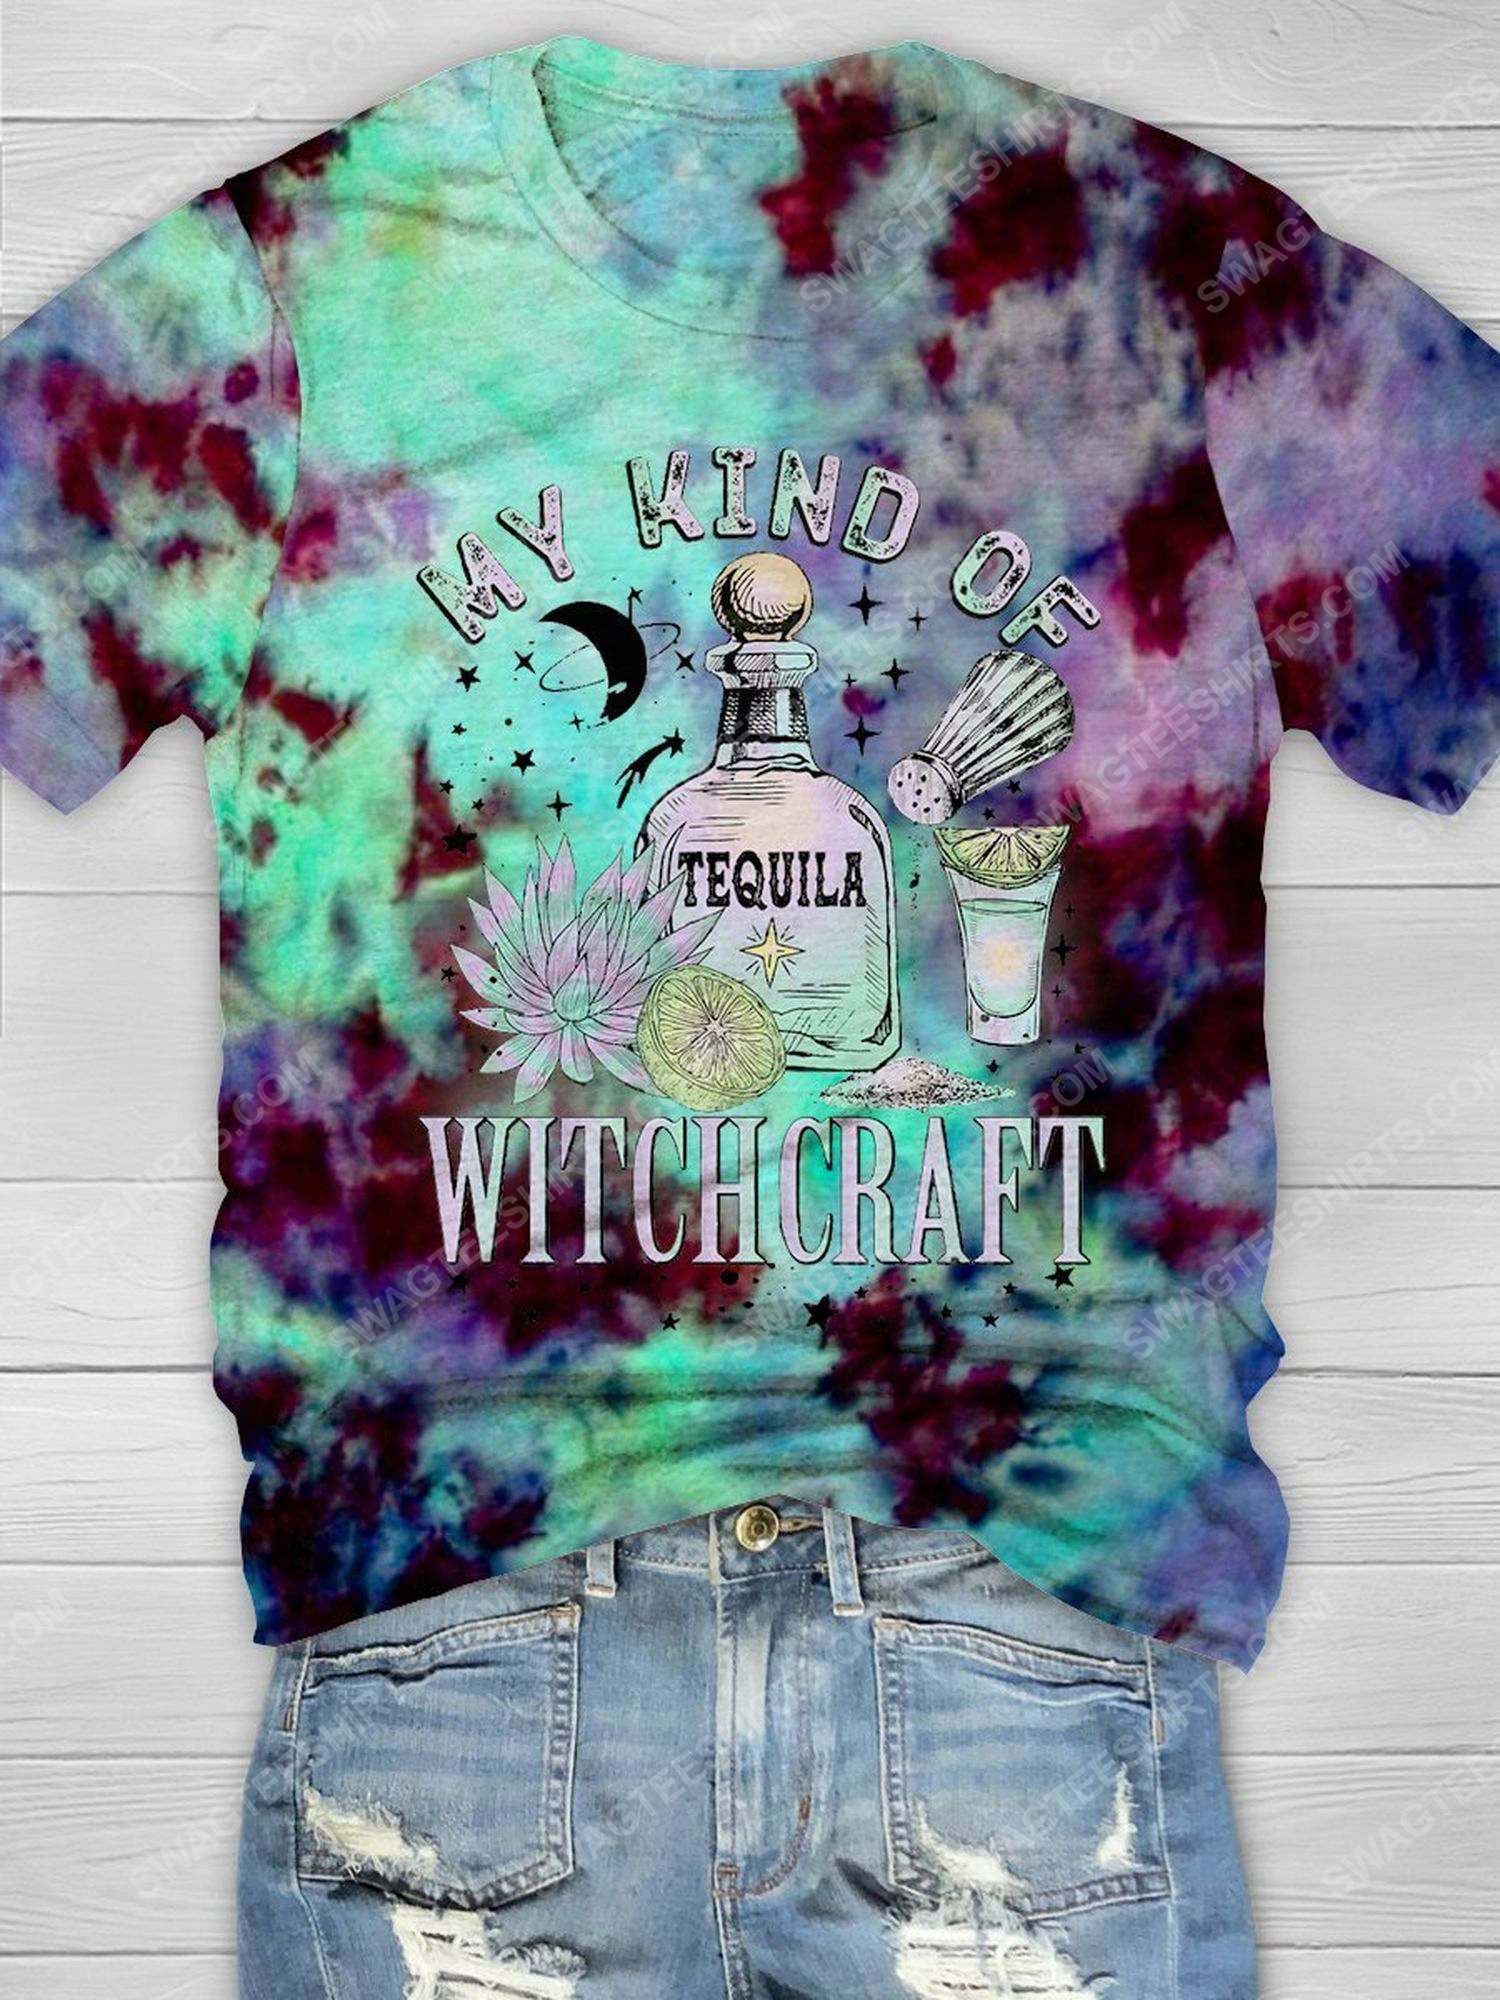 [special edition] Halloween my kind of witchcraft tie dye shirt – maria (halloween)